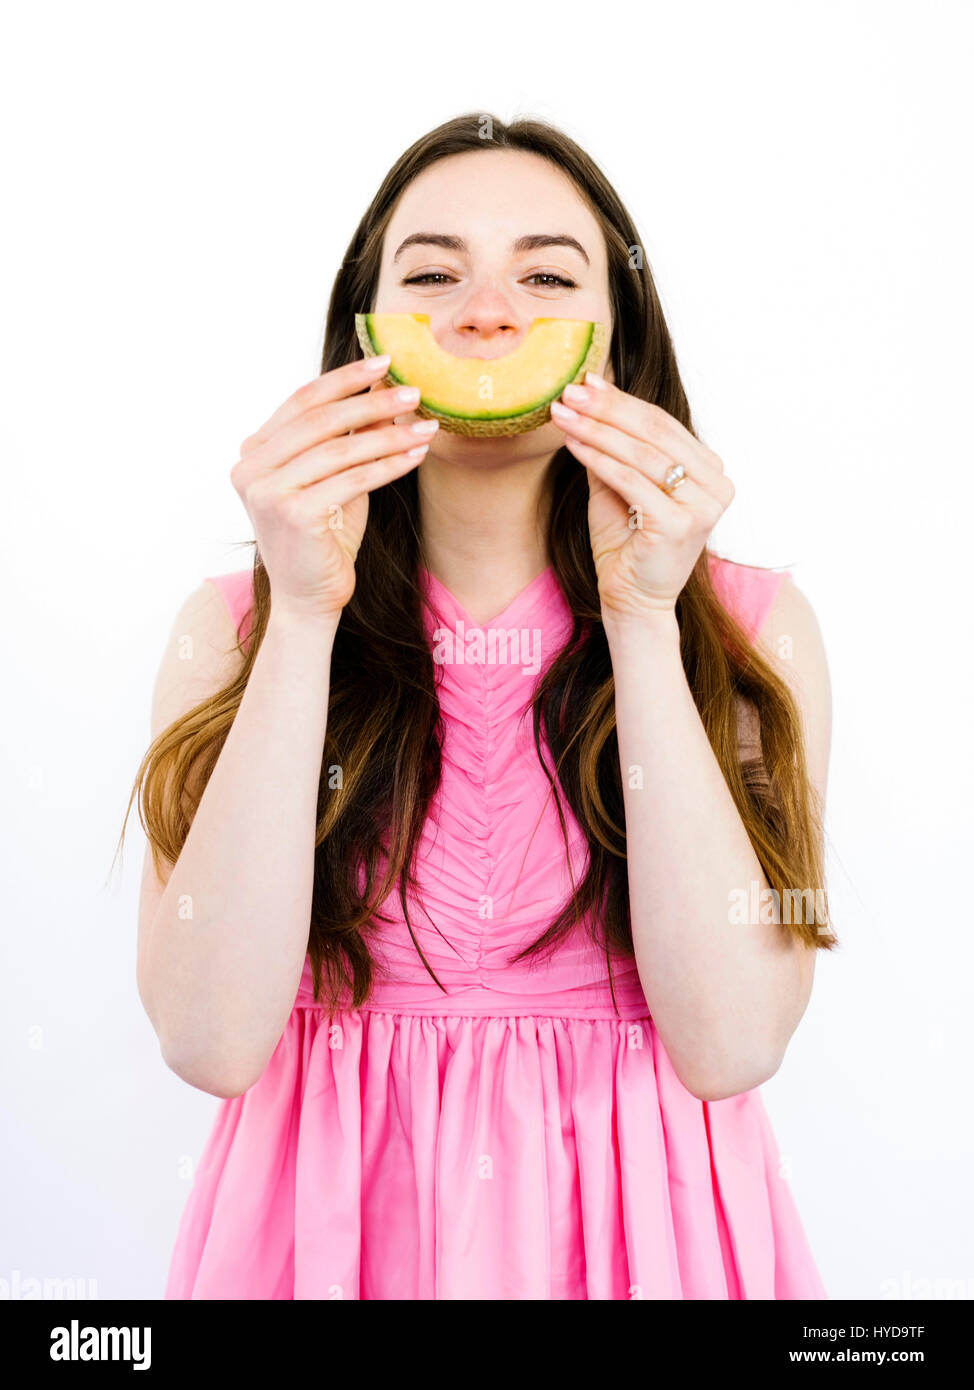 Woman holding slice of melon in front of her mouth Stock Photo